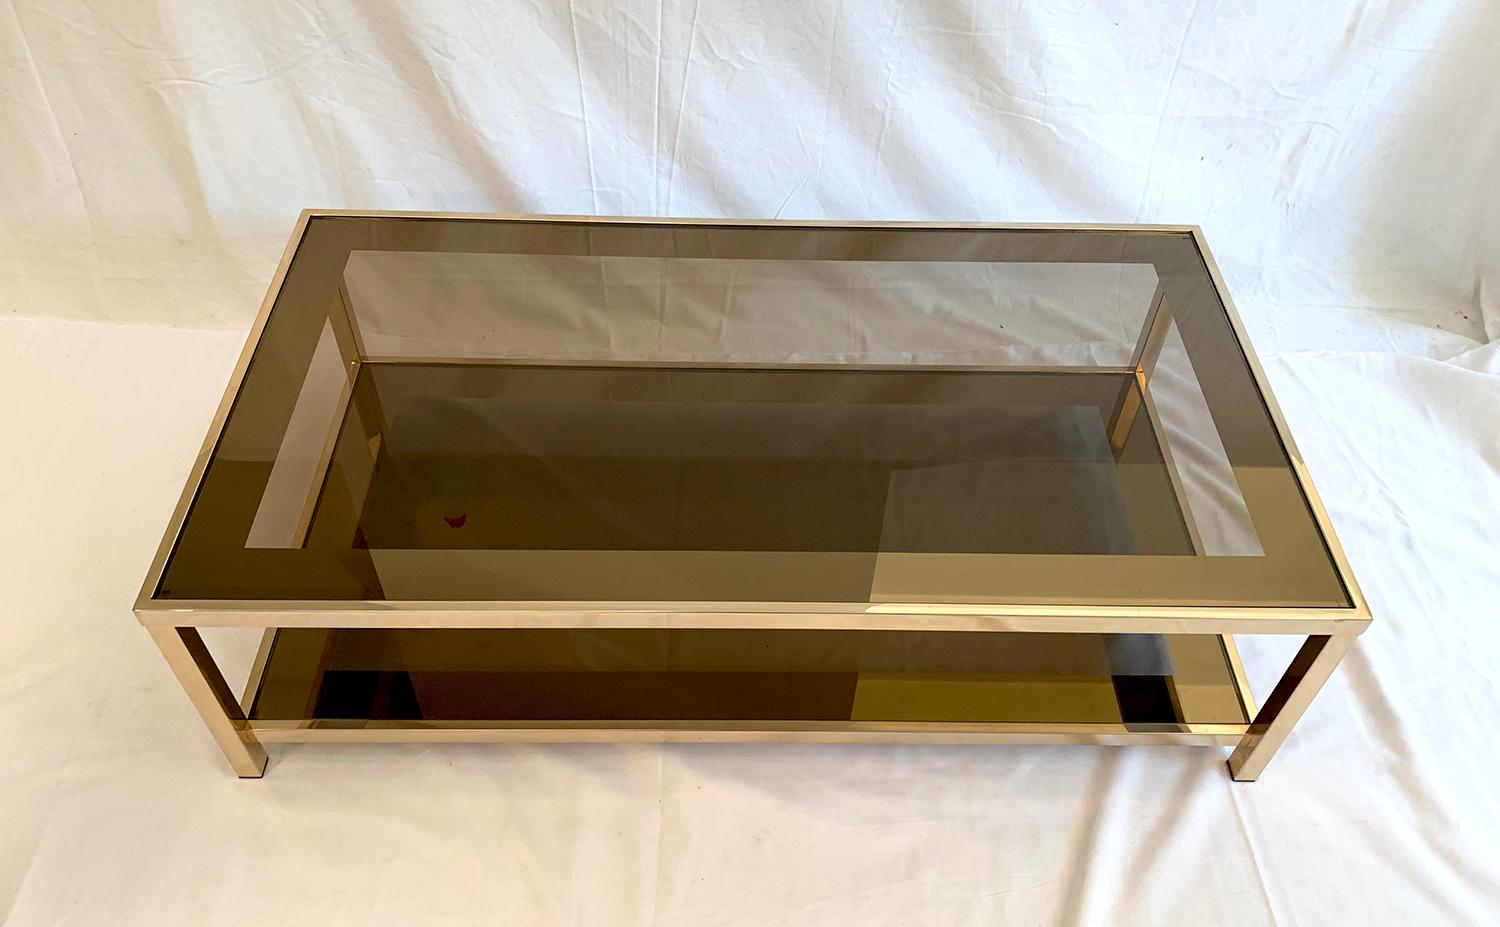 Beautiful coffee table with two levels designed and produced by Belgo Chrome, 1970s. The structure, gilded with 23-carat gold, showcases two trays of smoked glass lined with a wide bronze mirror band. The table is in very good